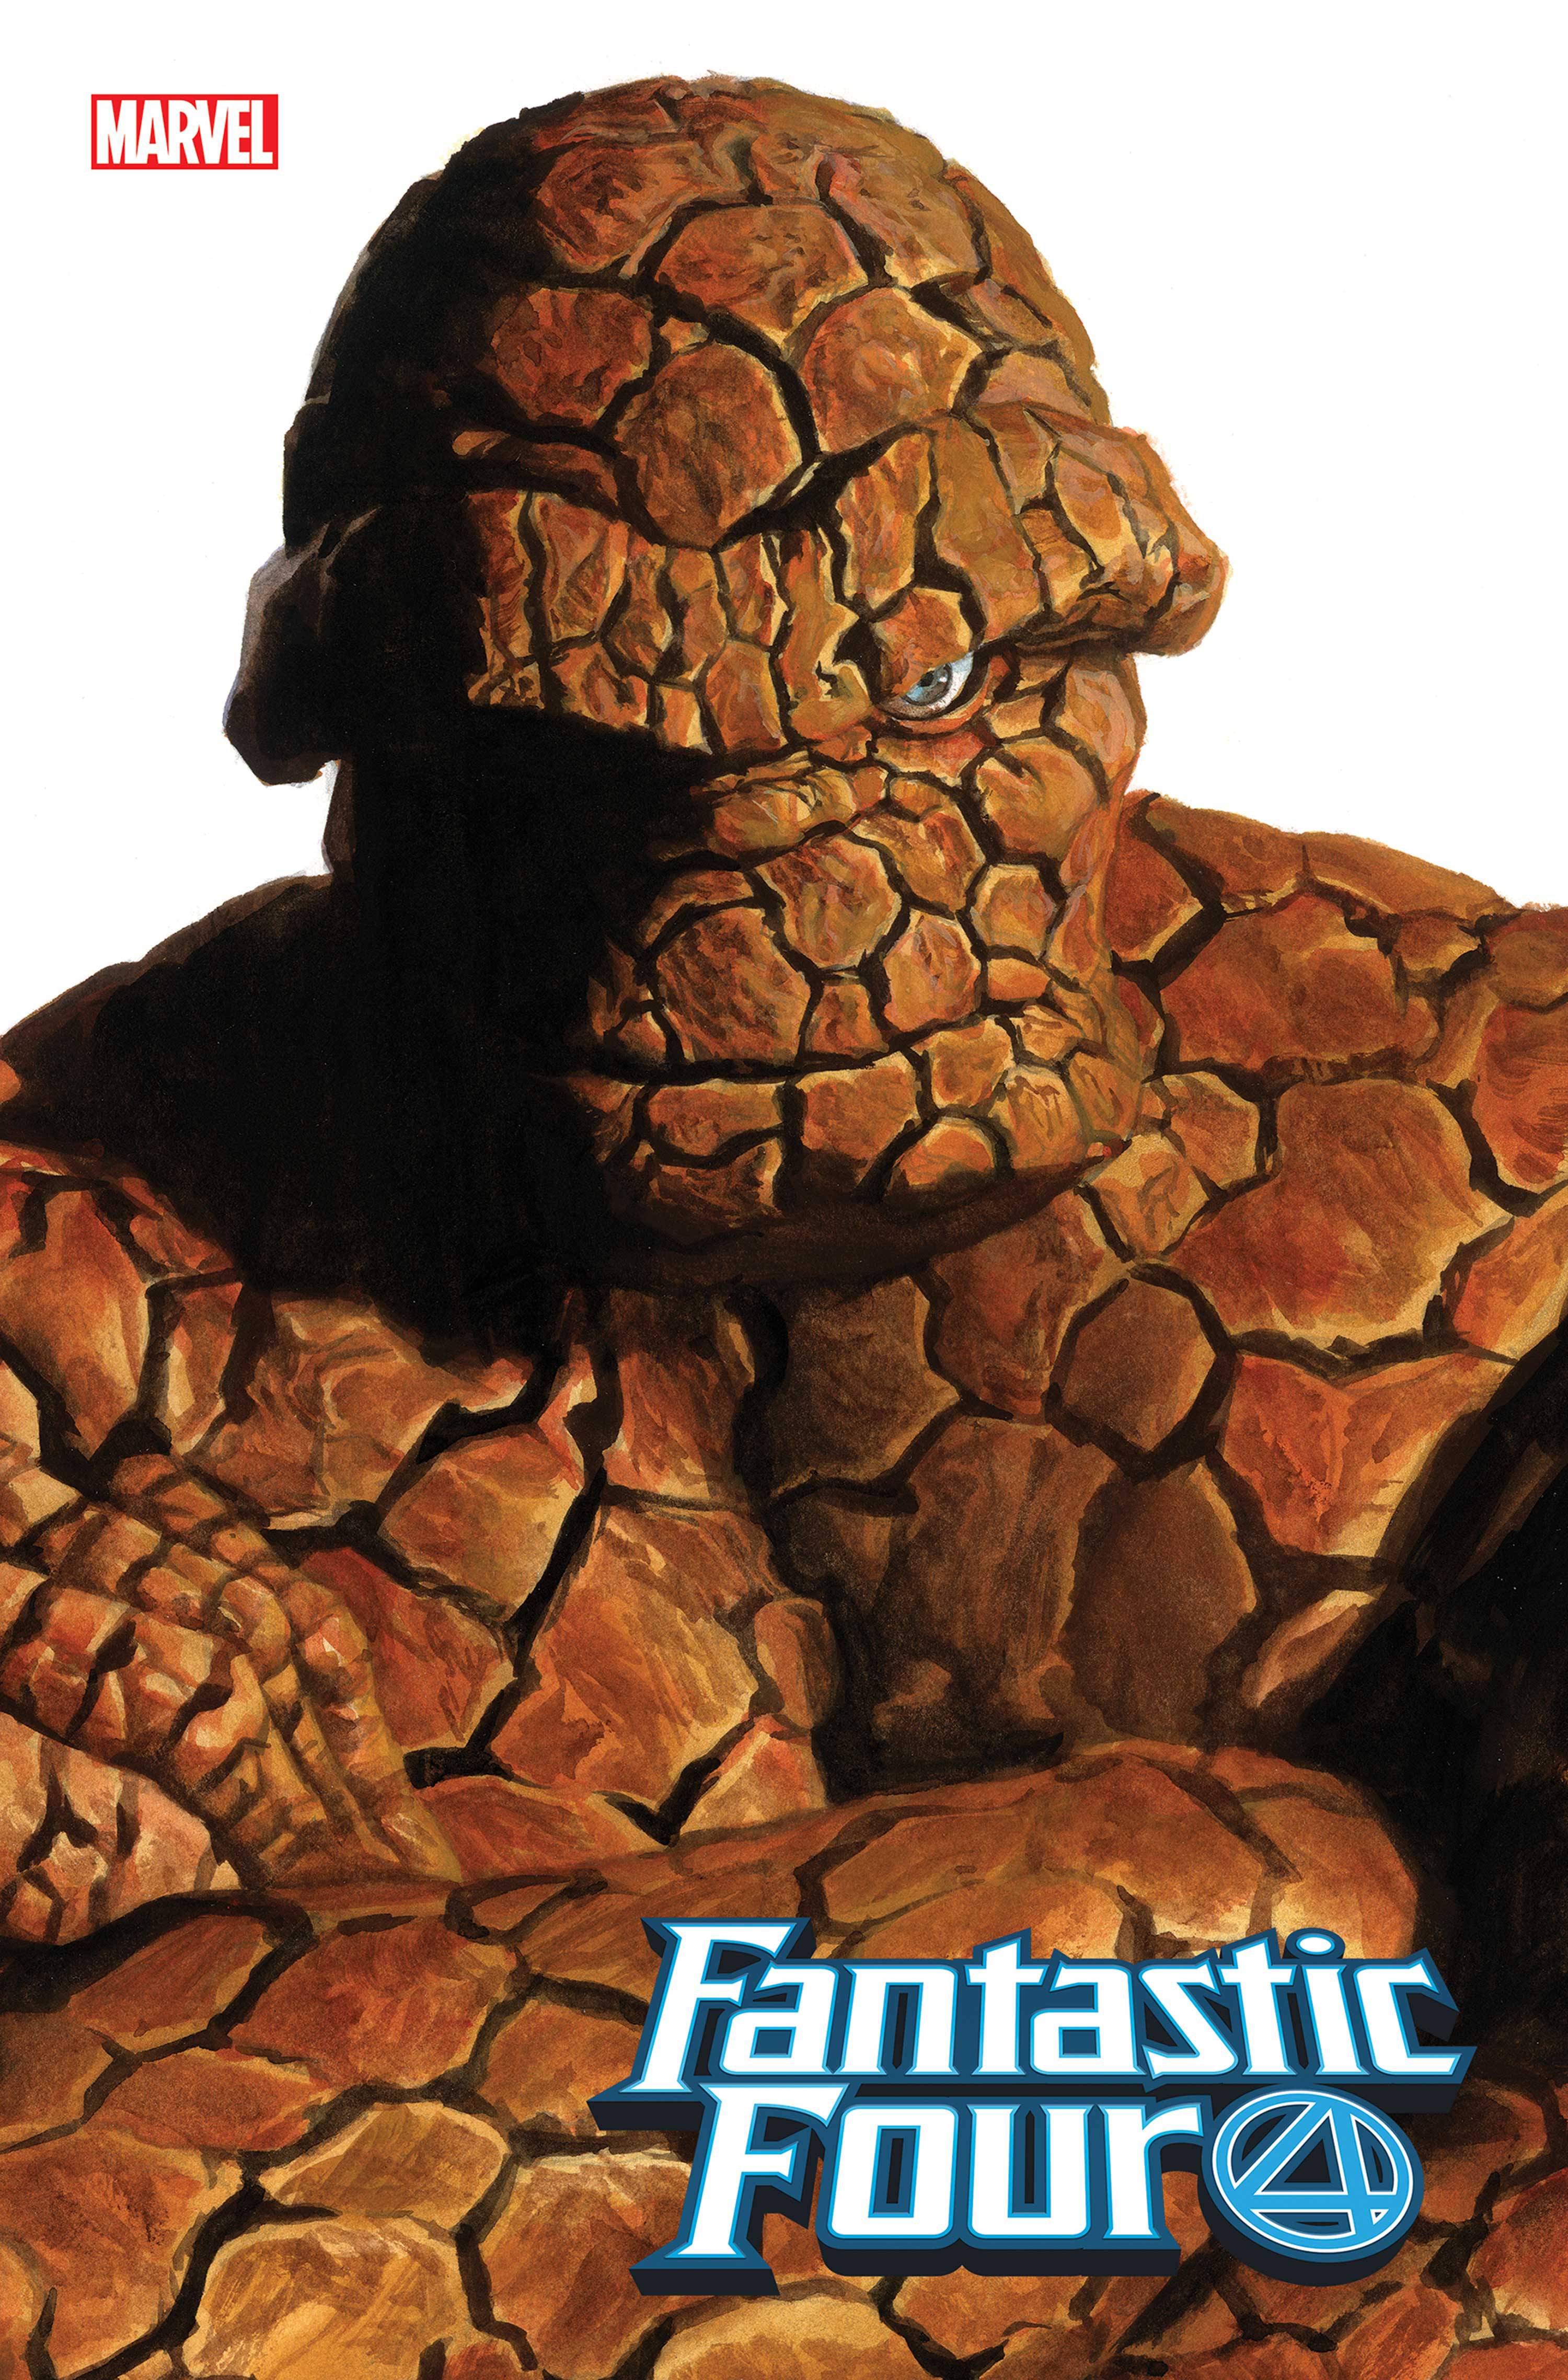 FANTASTIC FOUR #24 ALEX ROSS THING TIMELESS VARIANT 09/30/20